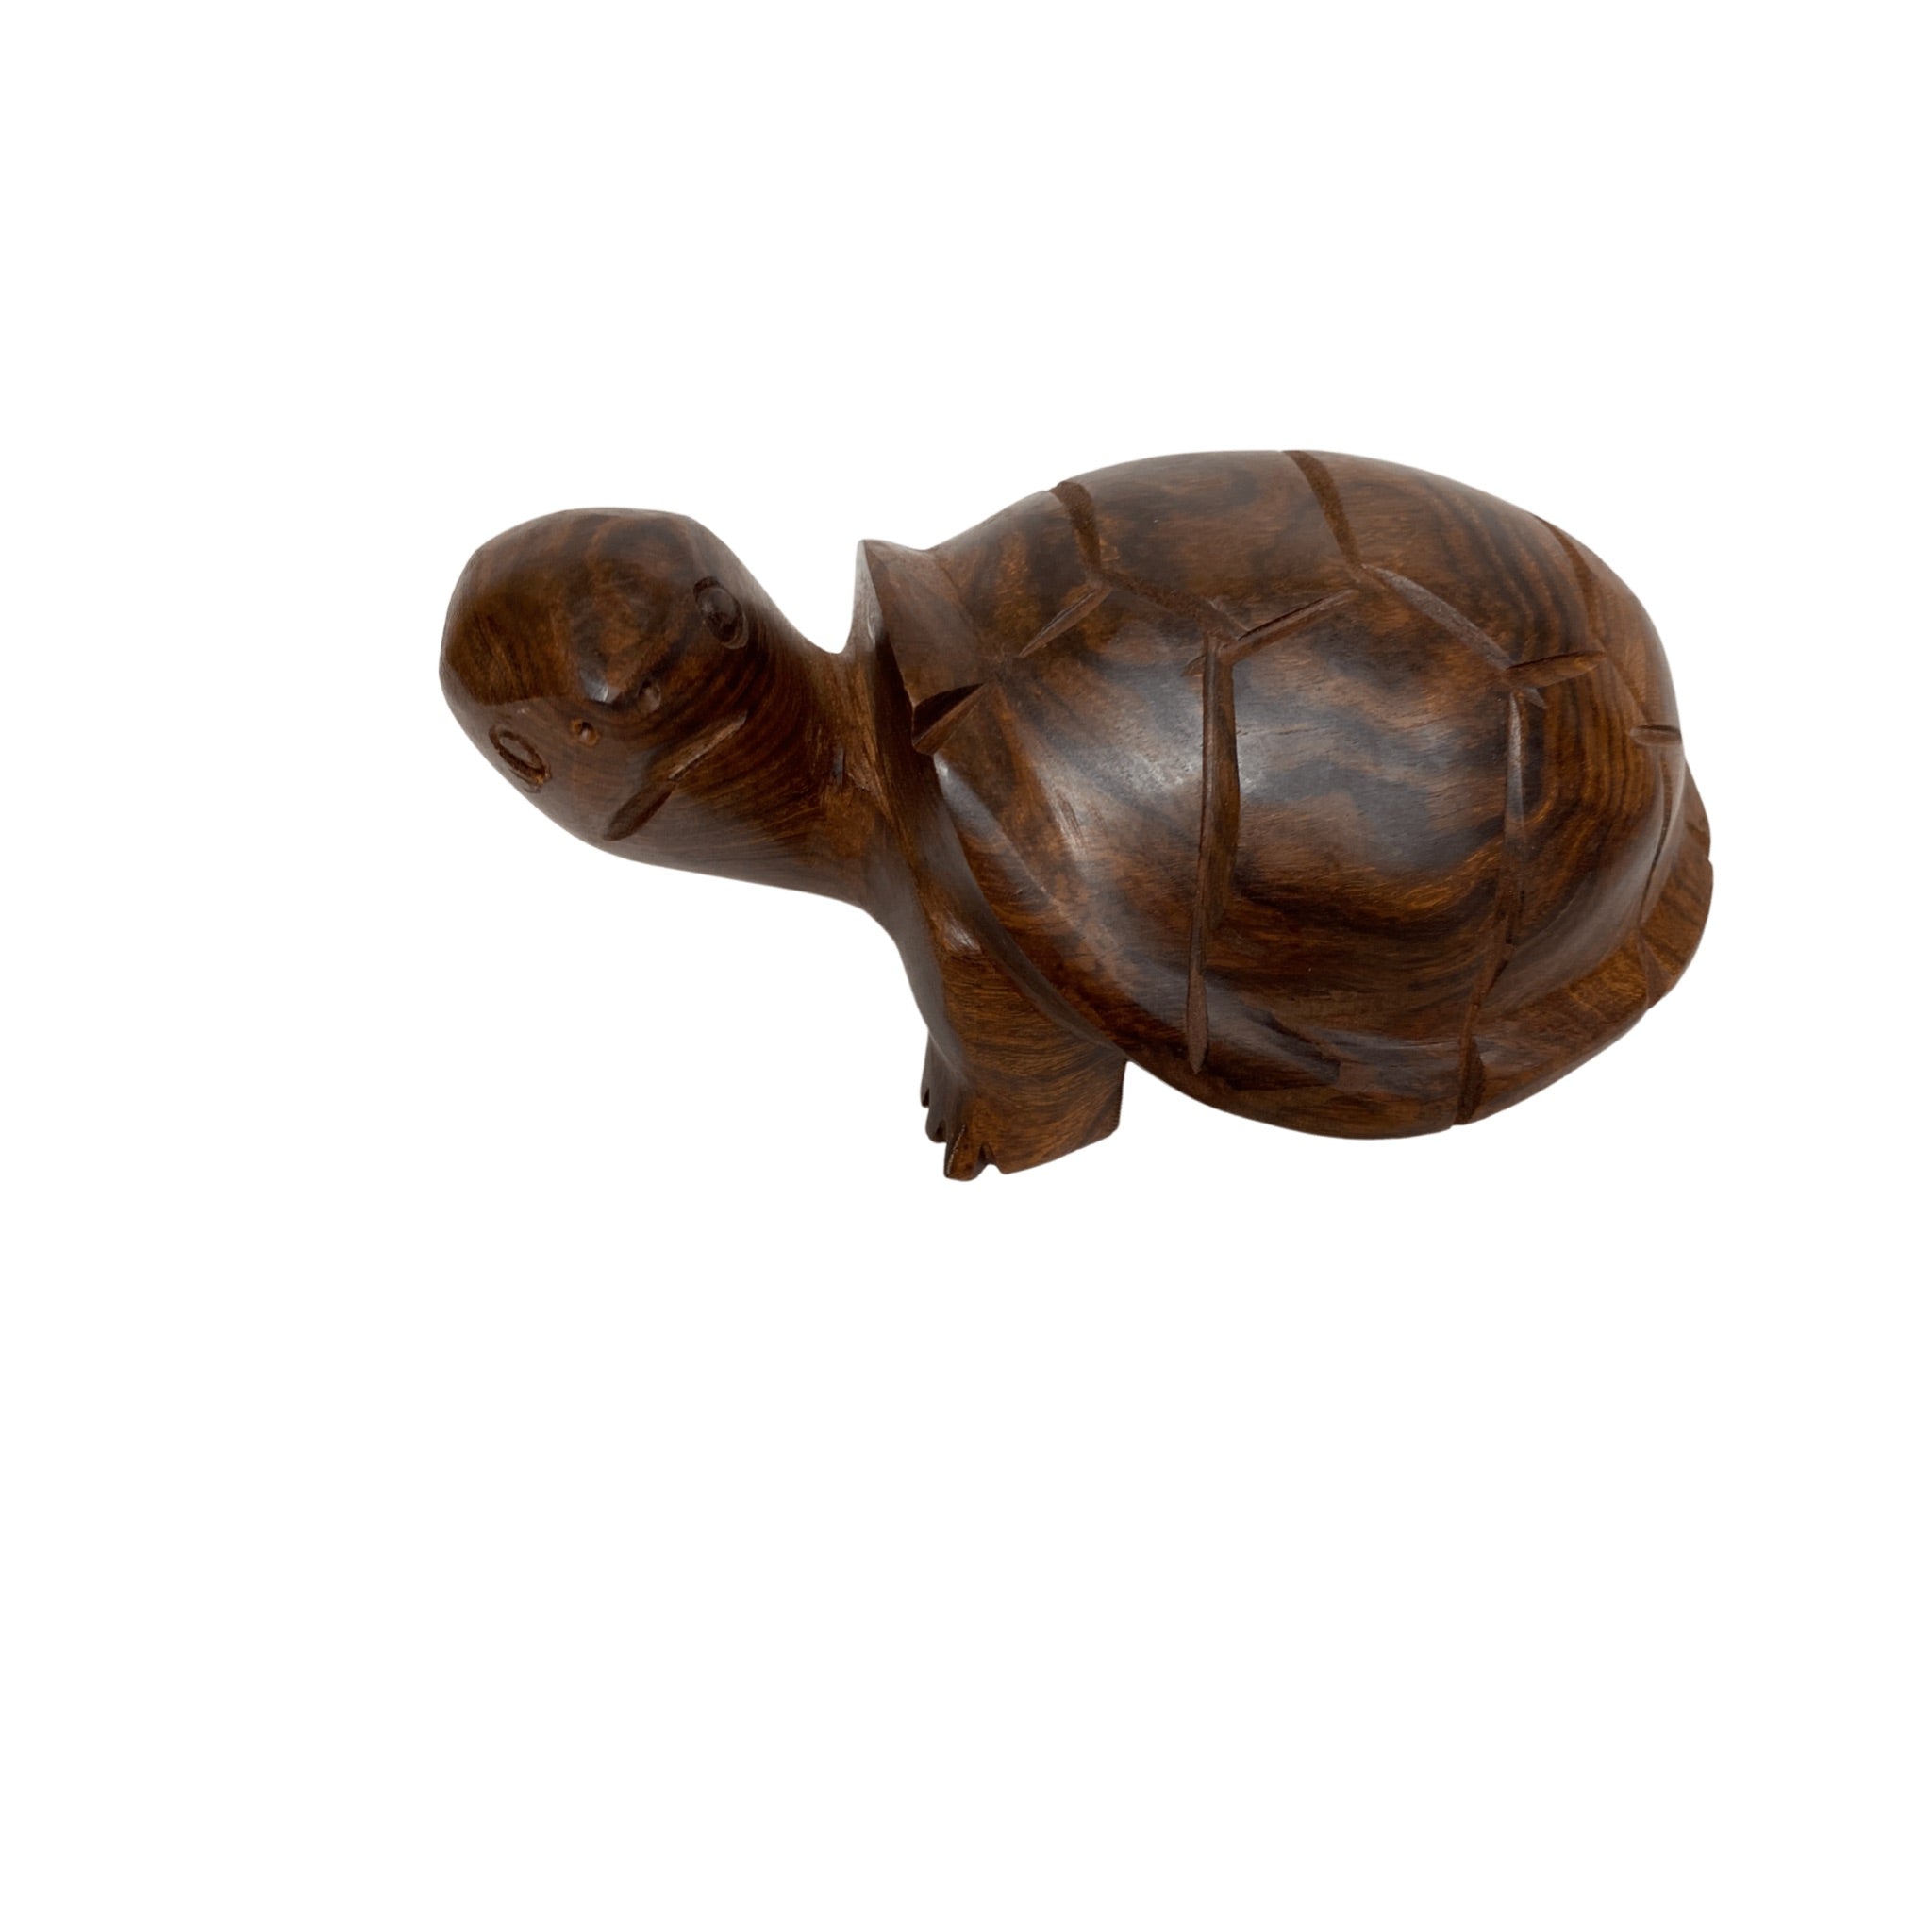 Ironwood Land Turtle made in Mexico Turtle Vintage ironwood hand carved  Desert Wood carved Turtle Wood C 6.5